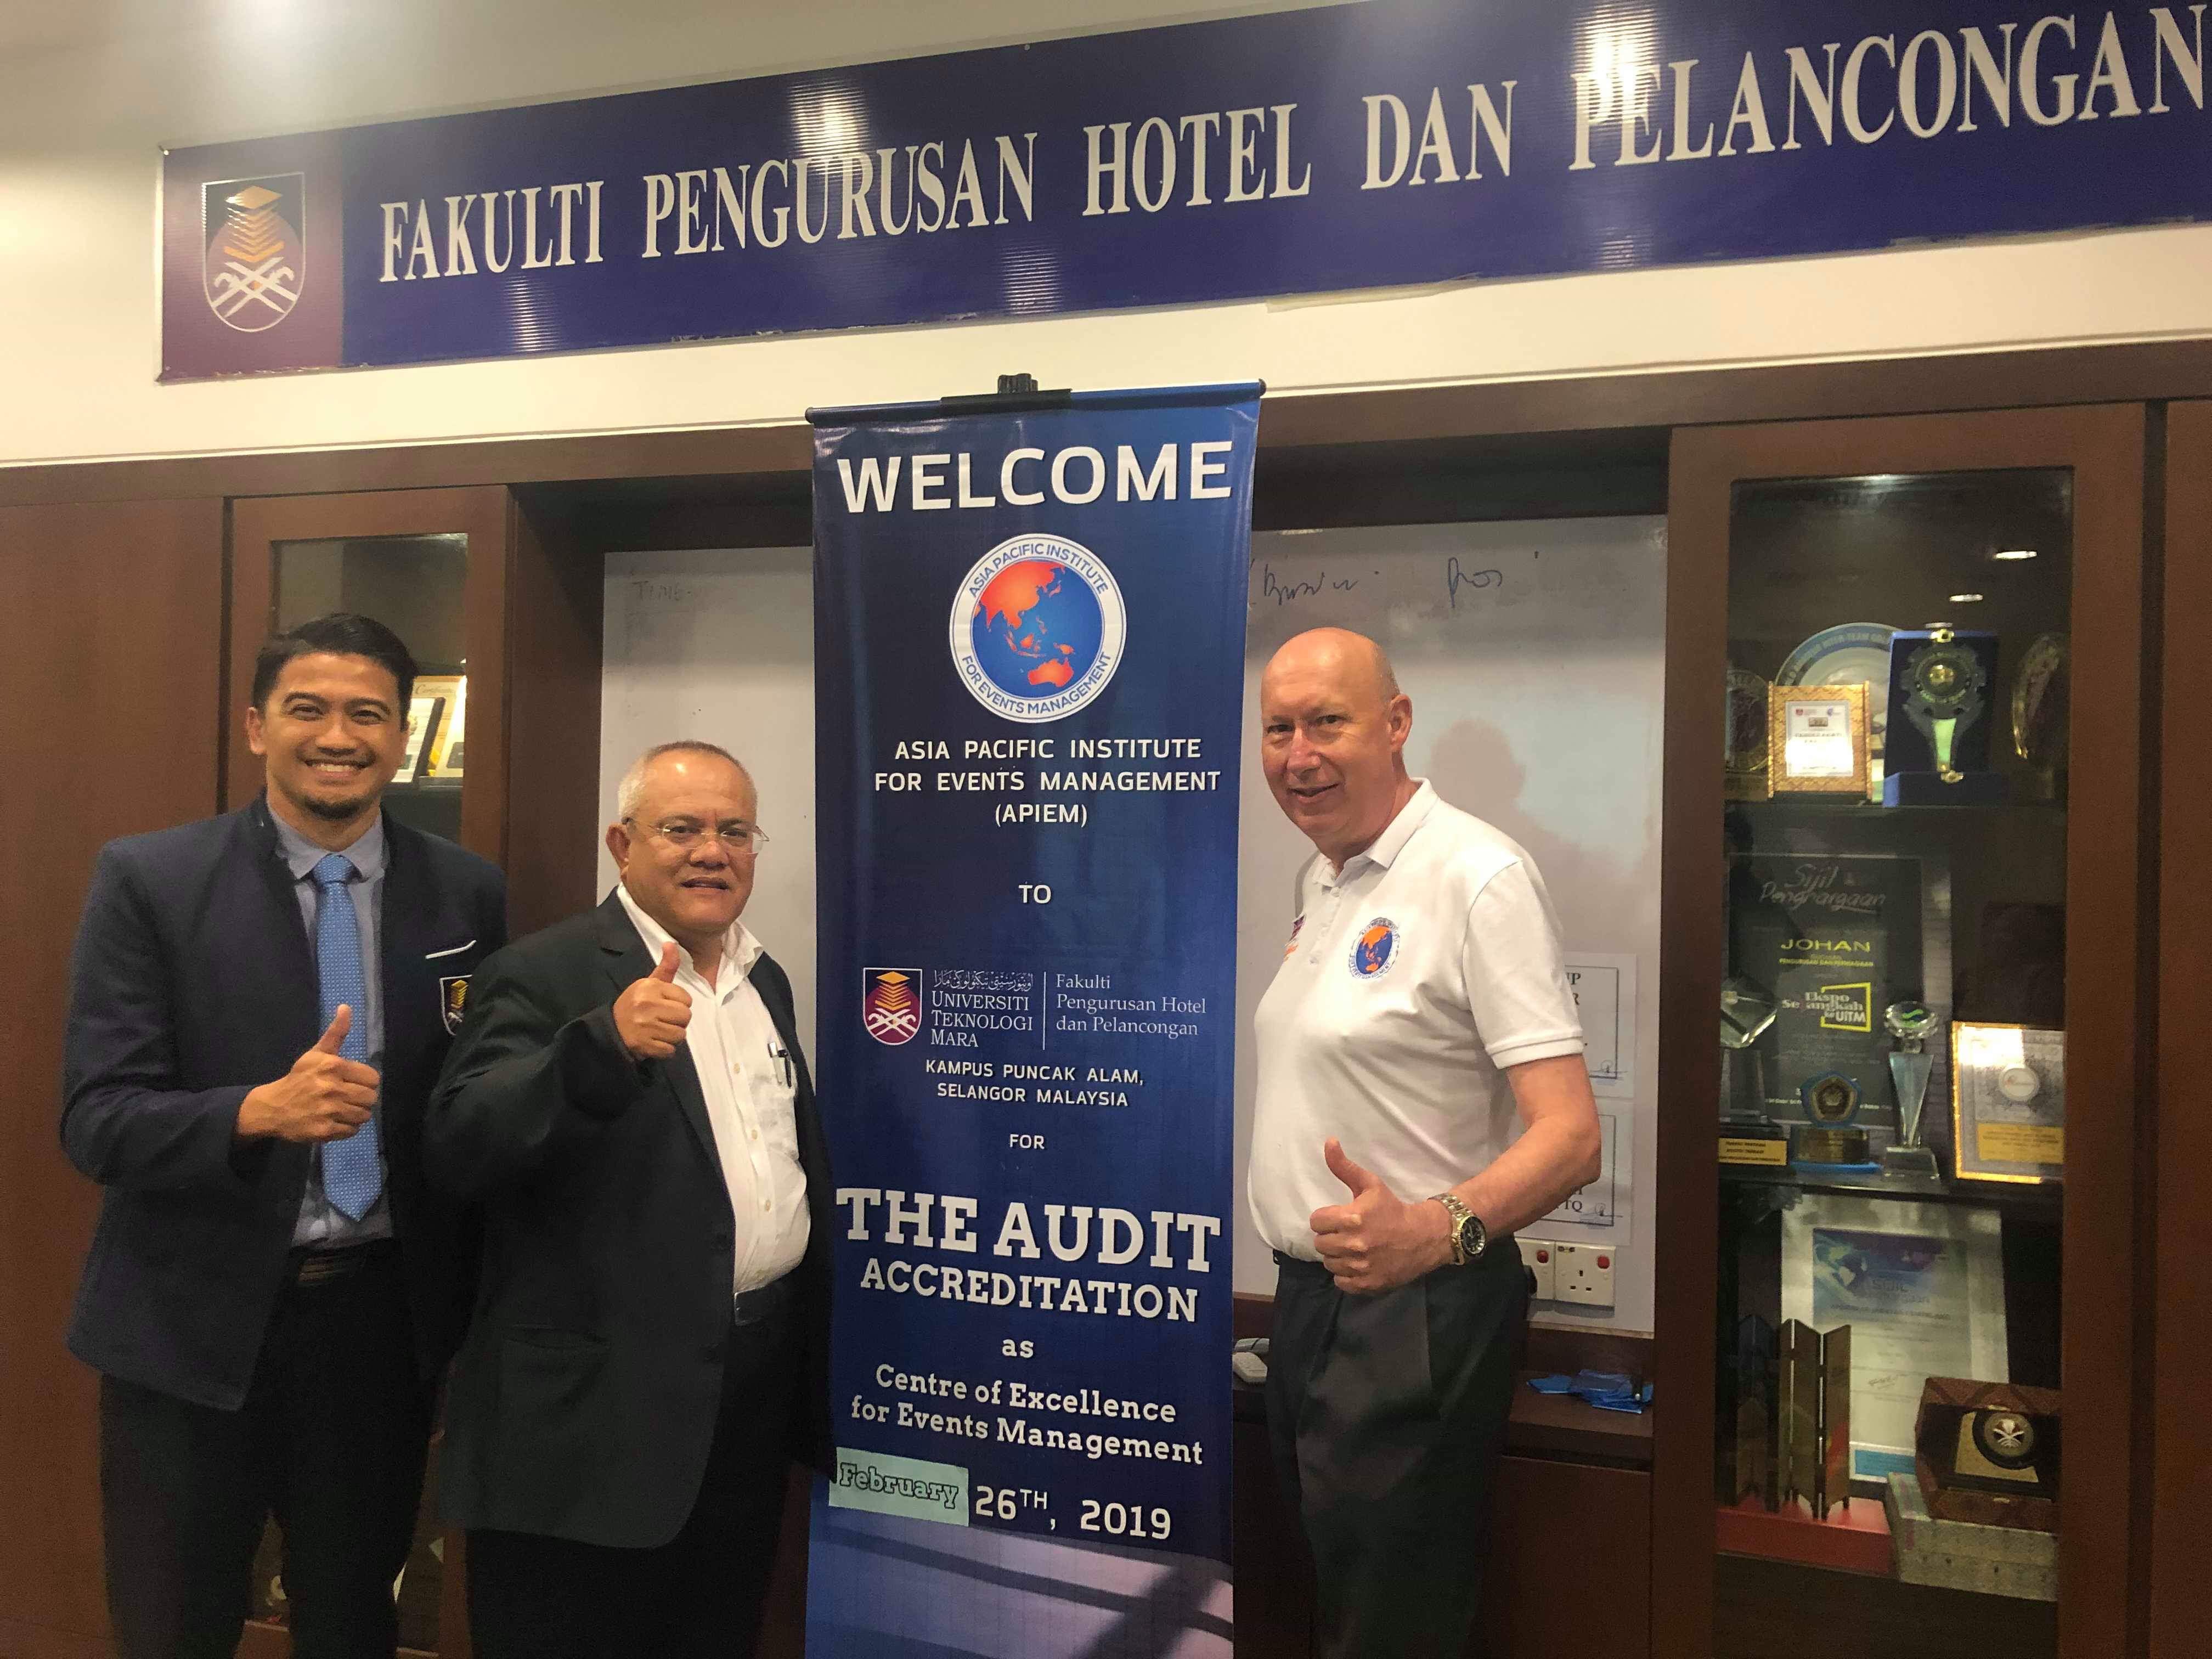 UiTM, Malaysia Joins APIEM as an International Centre of Excellence****